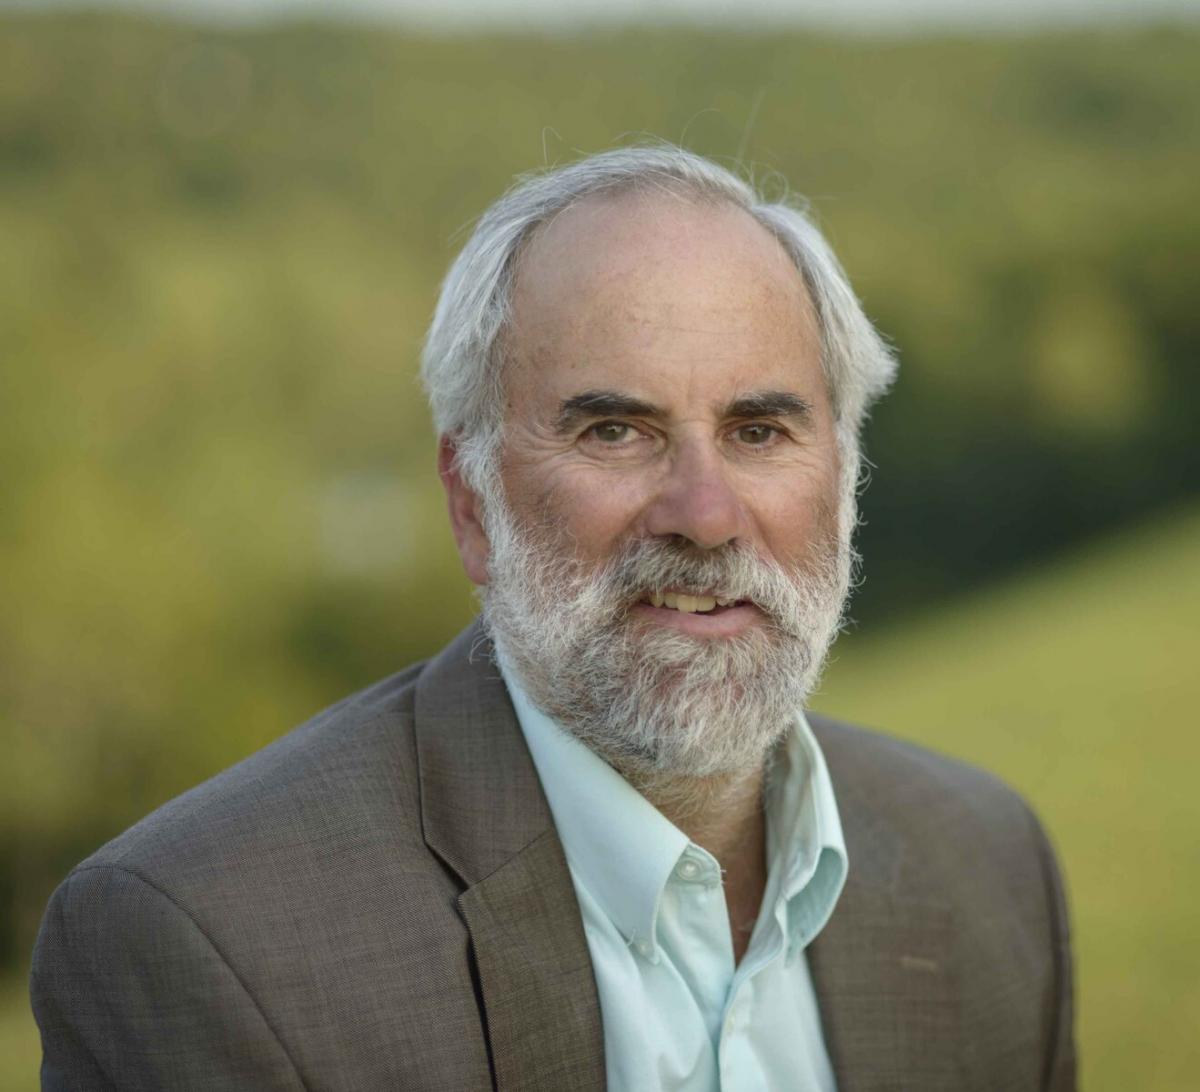 A photograph of Ken Norton, Executive Director of the National Alliance on Mental Illness, New Hampshire, who will speak at the Carsey School of Public Policy's June Coffee & Conversations